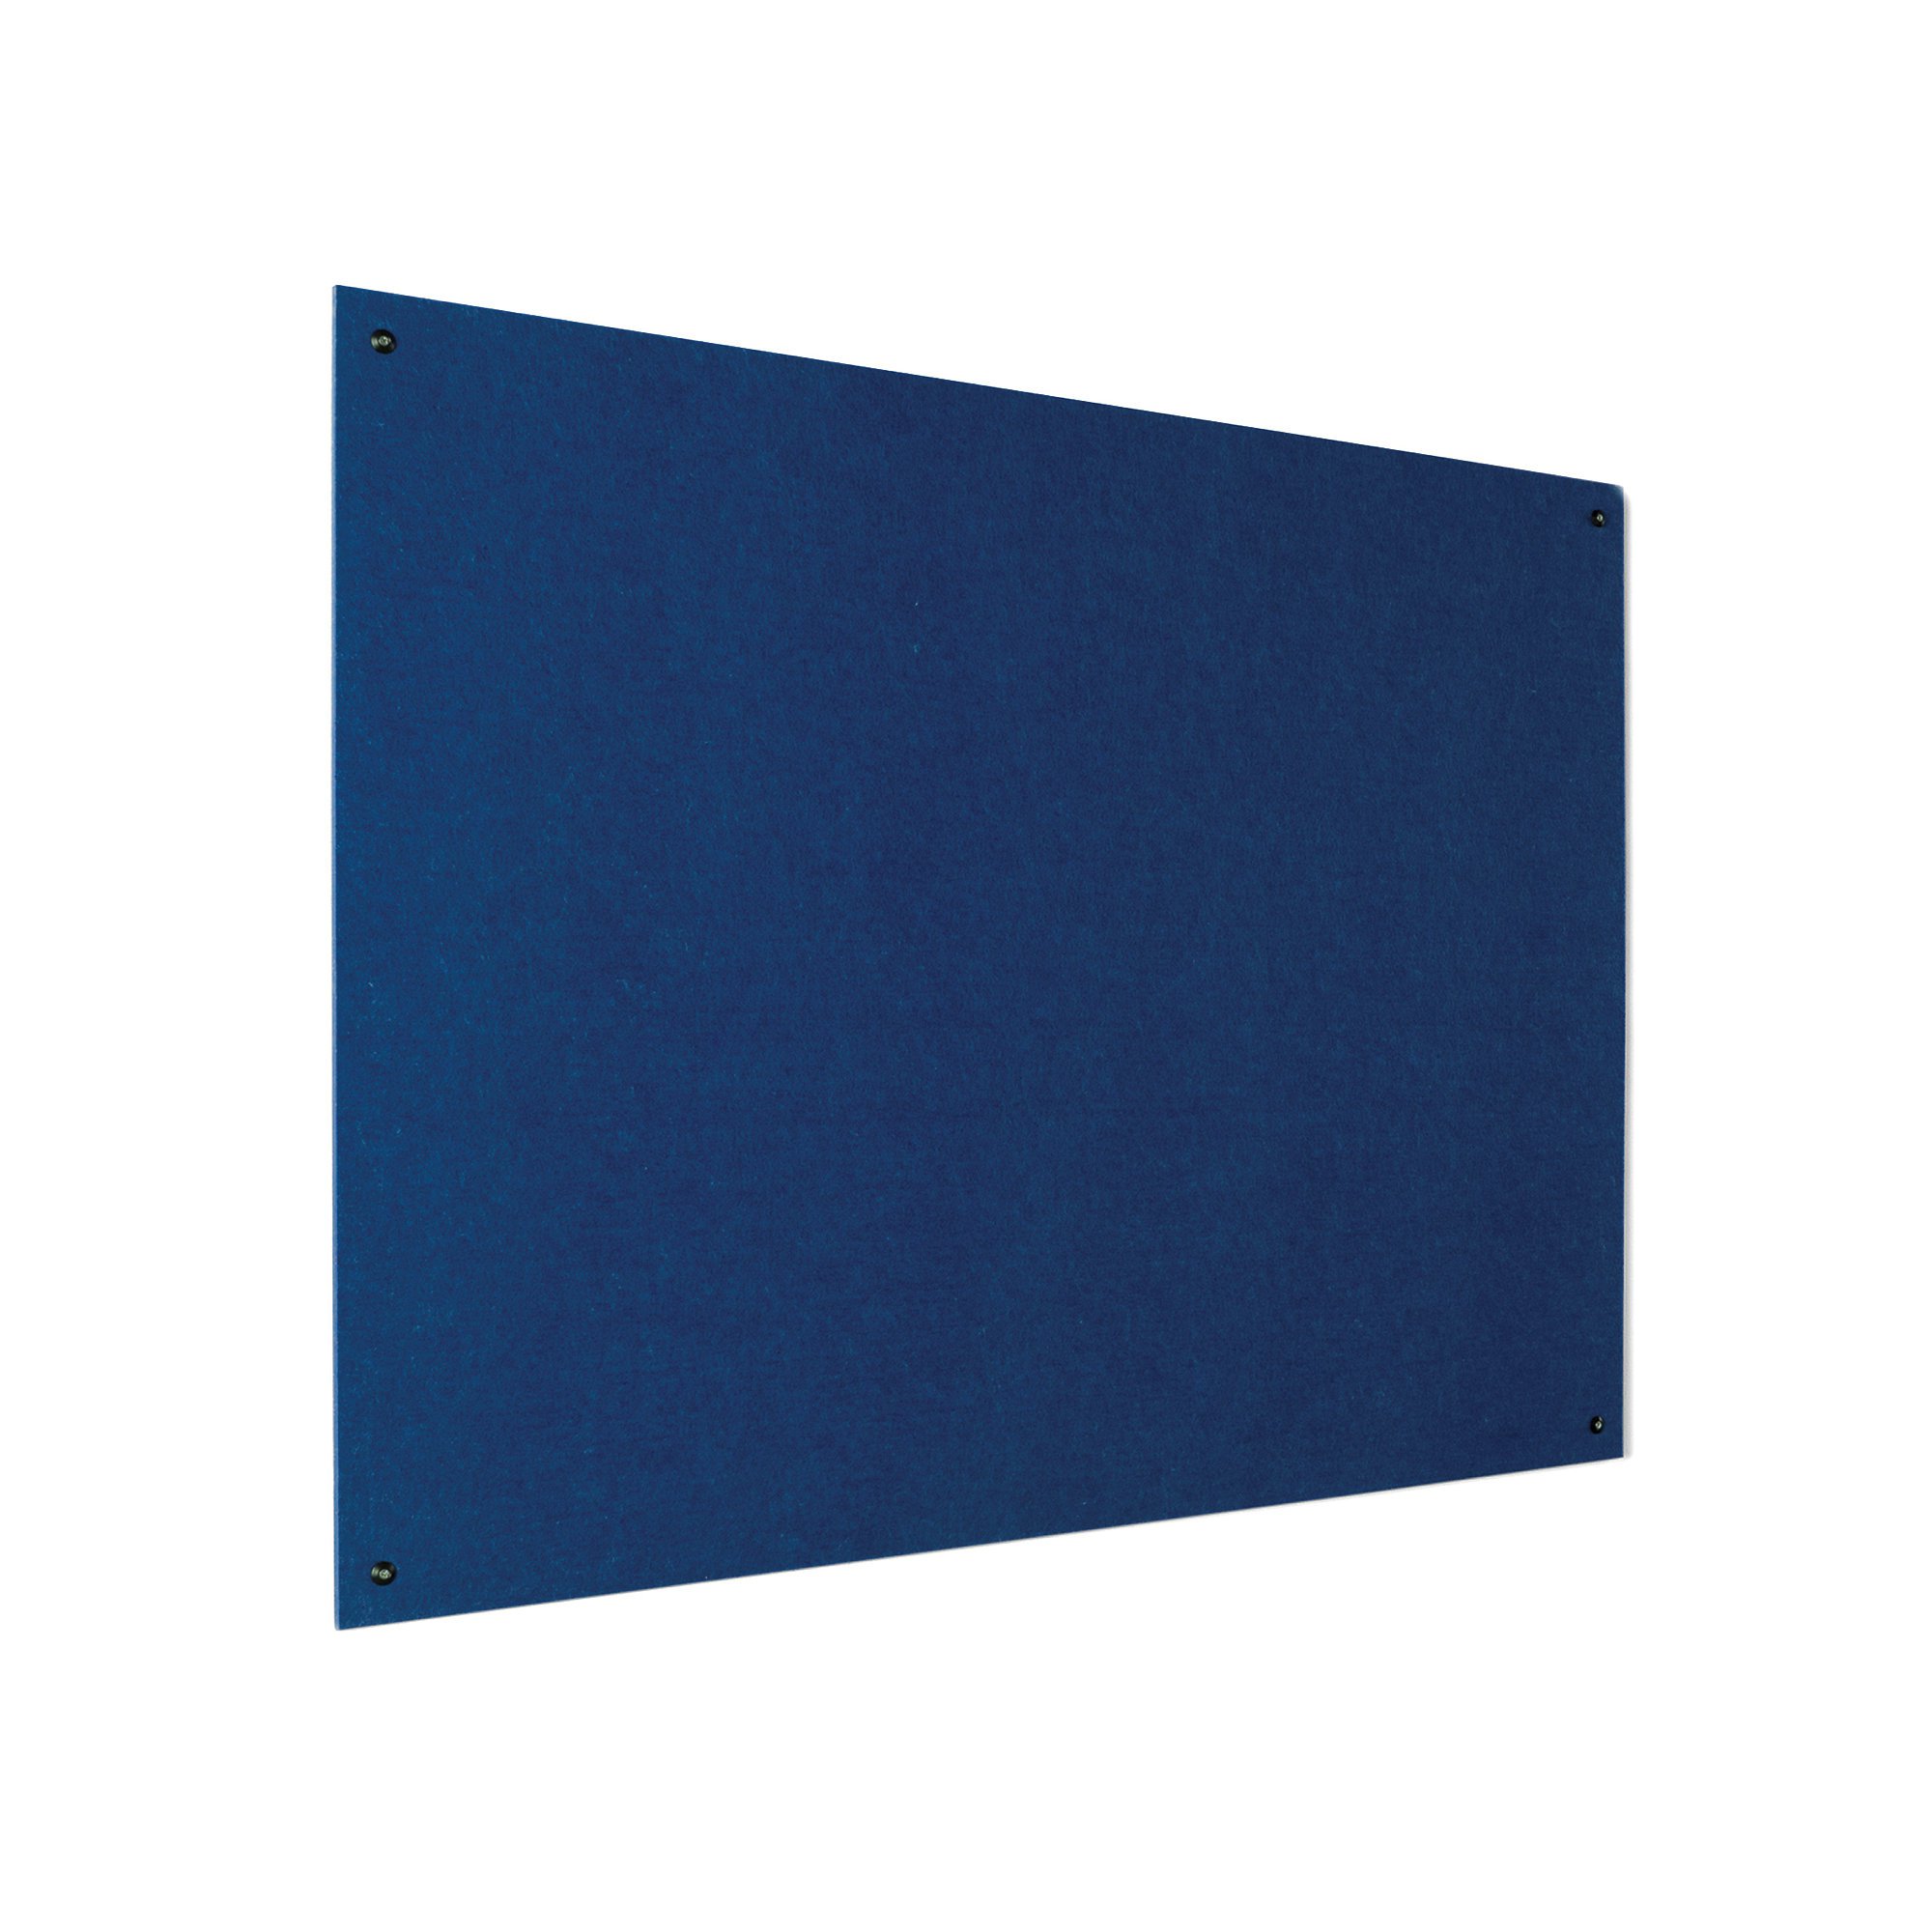 Recycled fire-retardant noticeboard, 1800x1200 mm, blue